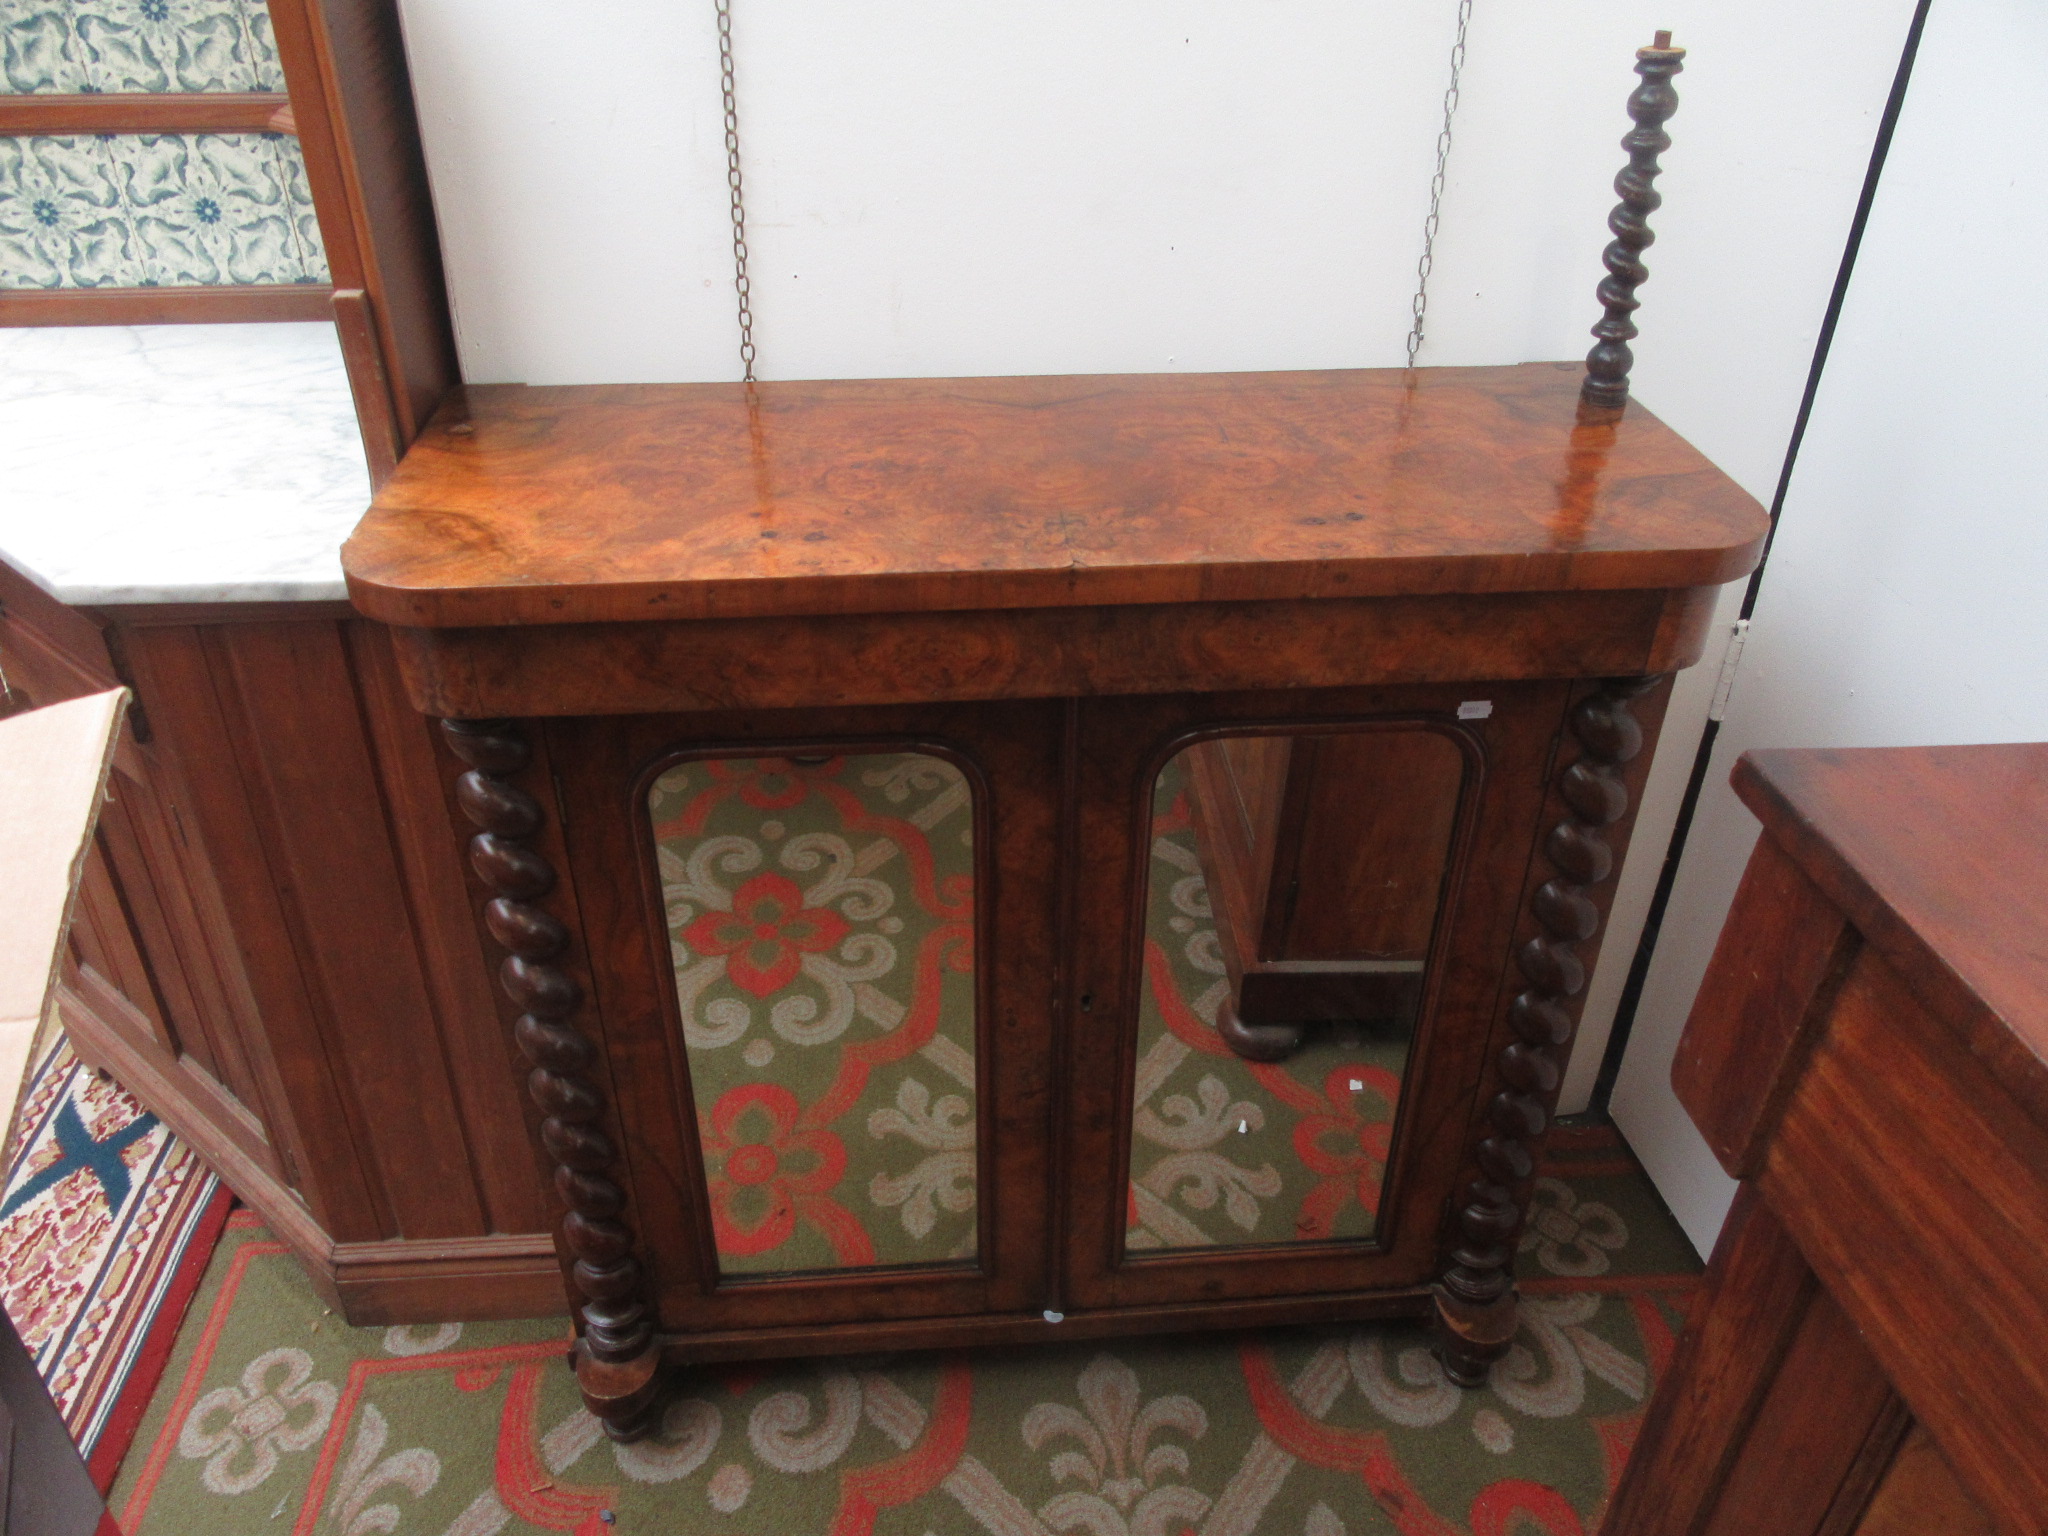 A Victorian burr walnut veneered chiffonier with a pair of arched mirrored doors flanked by spiral